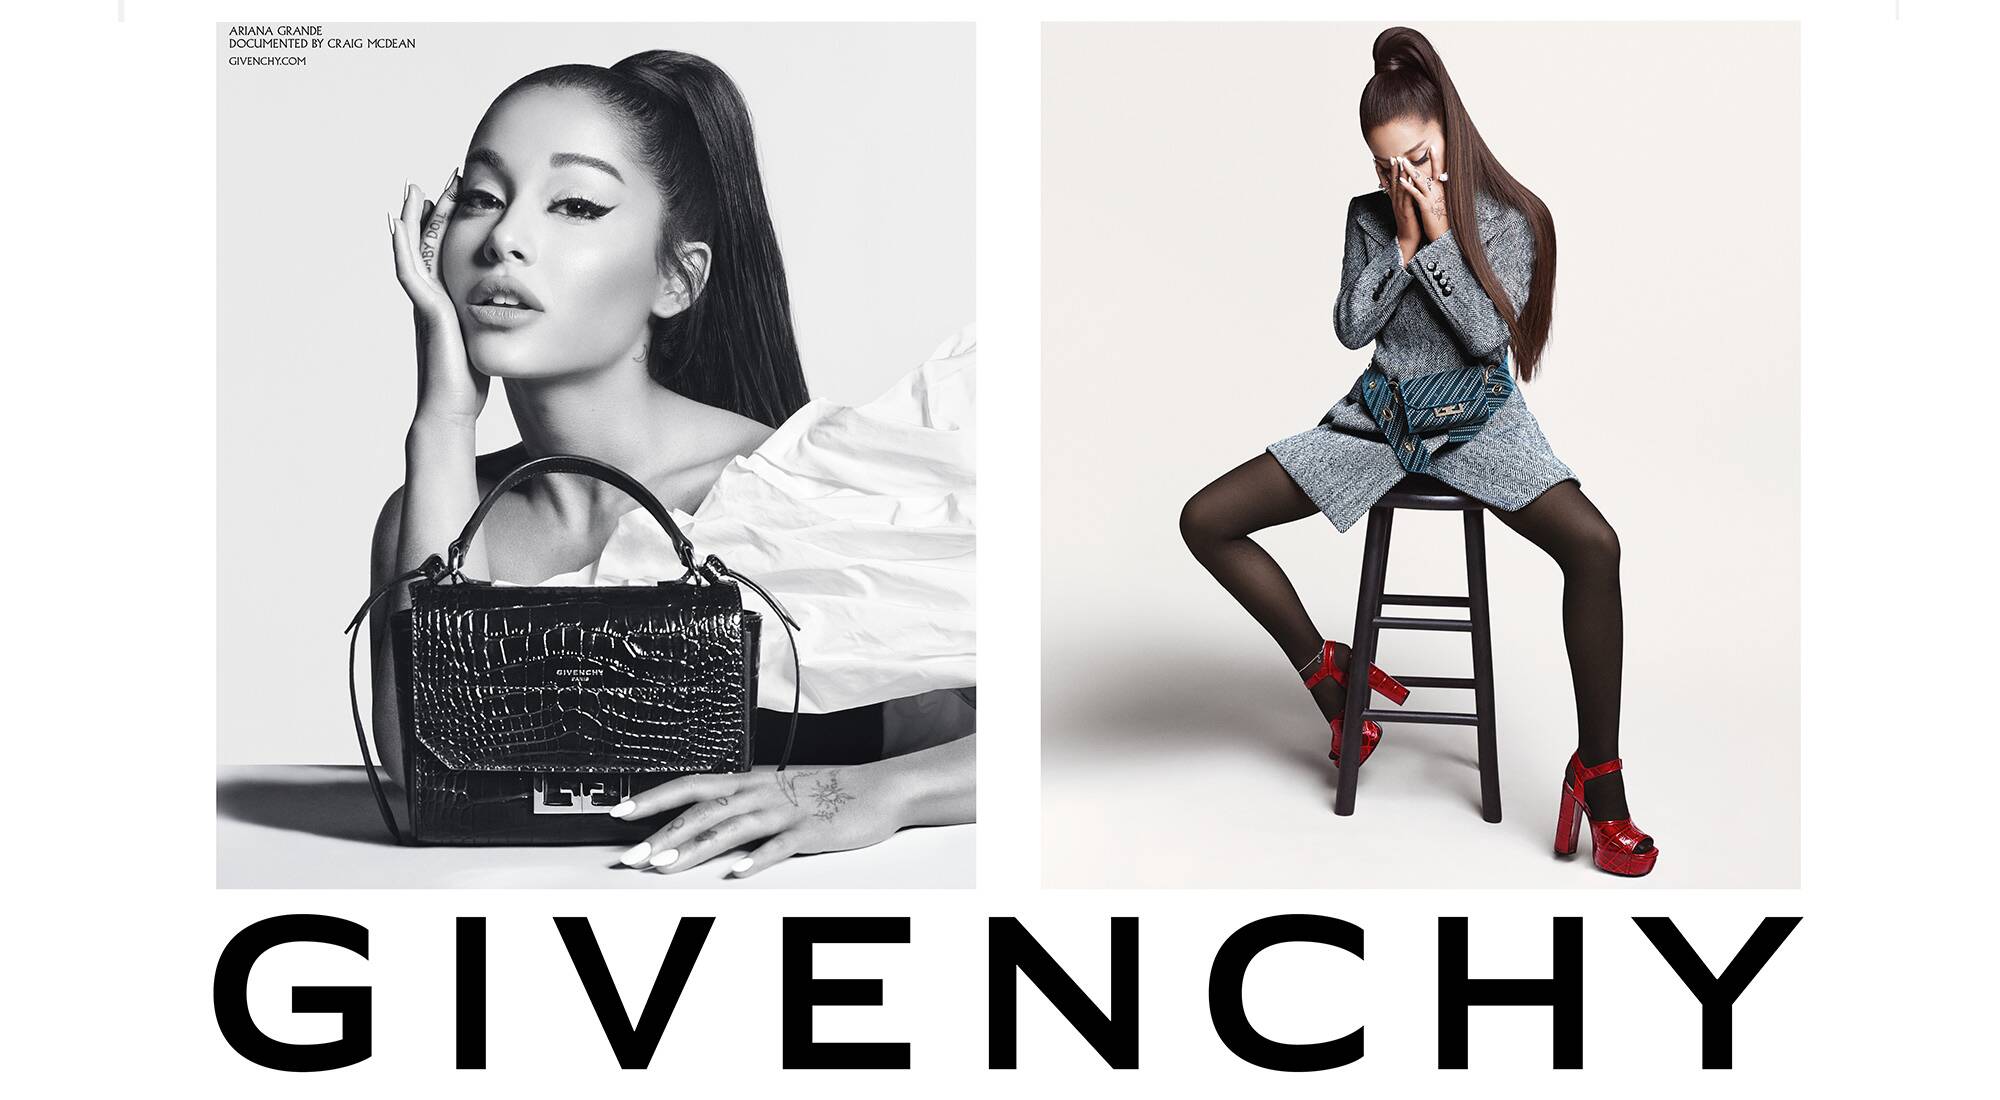 Givenchy unveils #Arivenchy campaign starring new muse Ariana